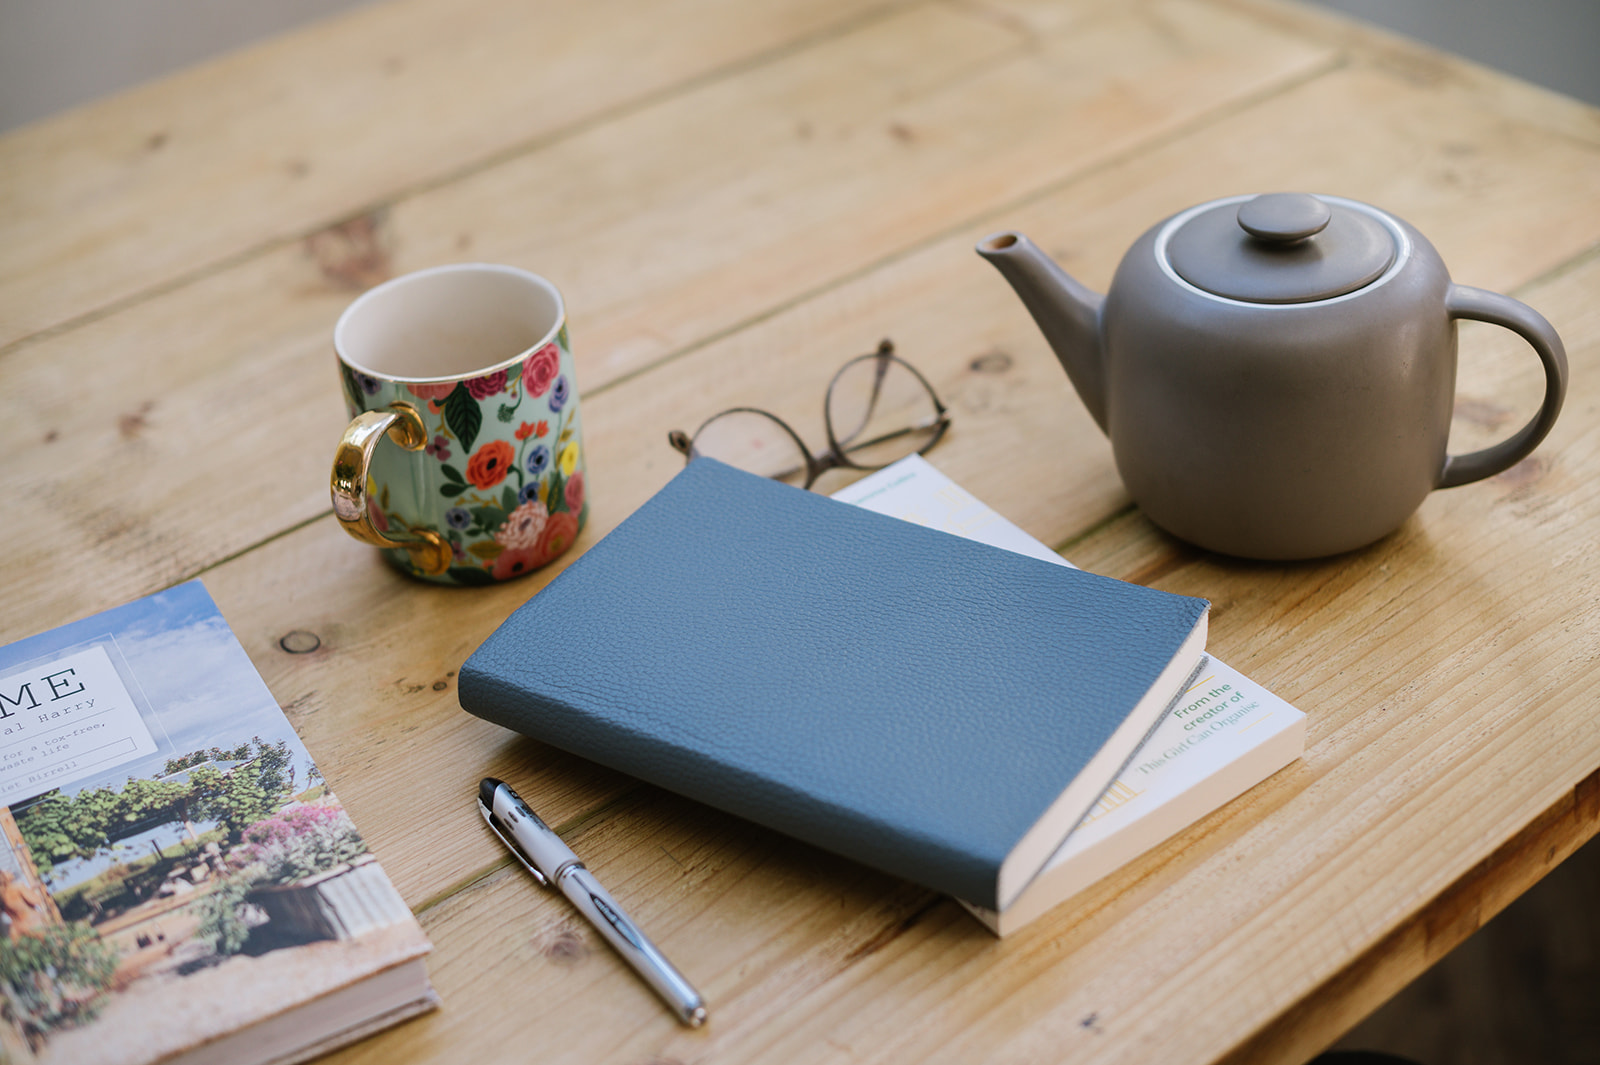 books, tea pot, mug and glasses on a wooden dining table